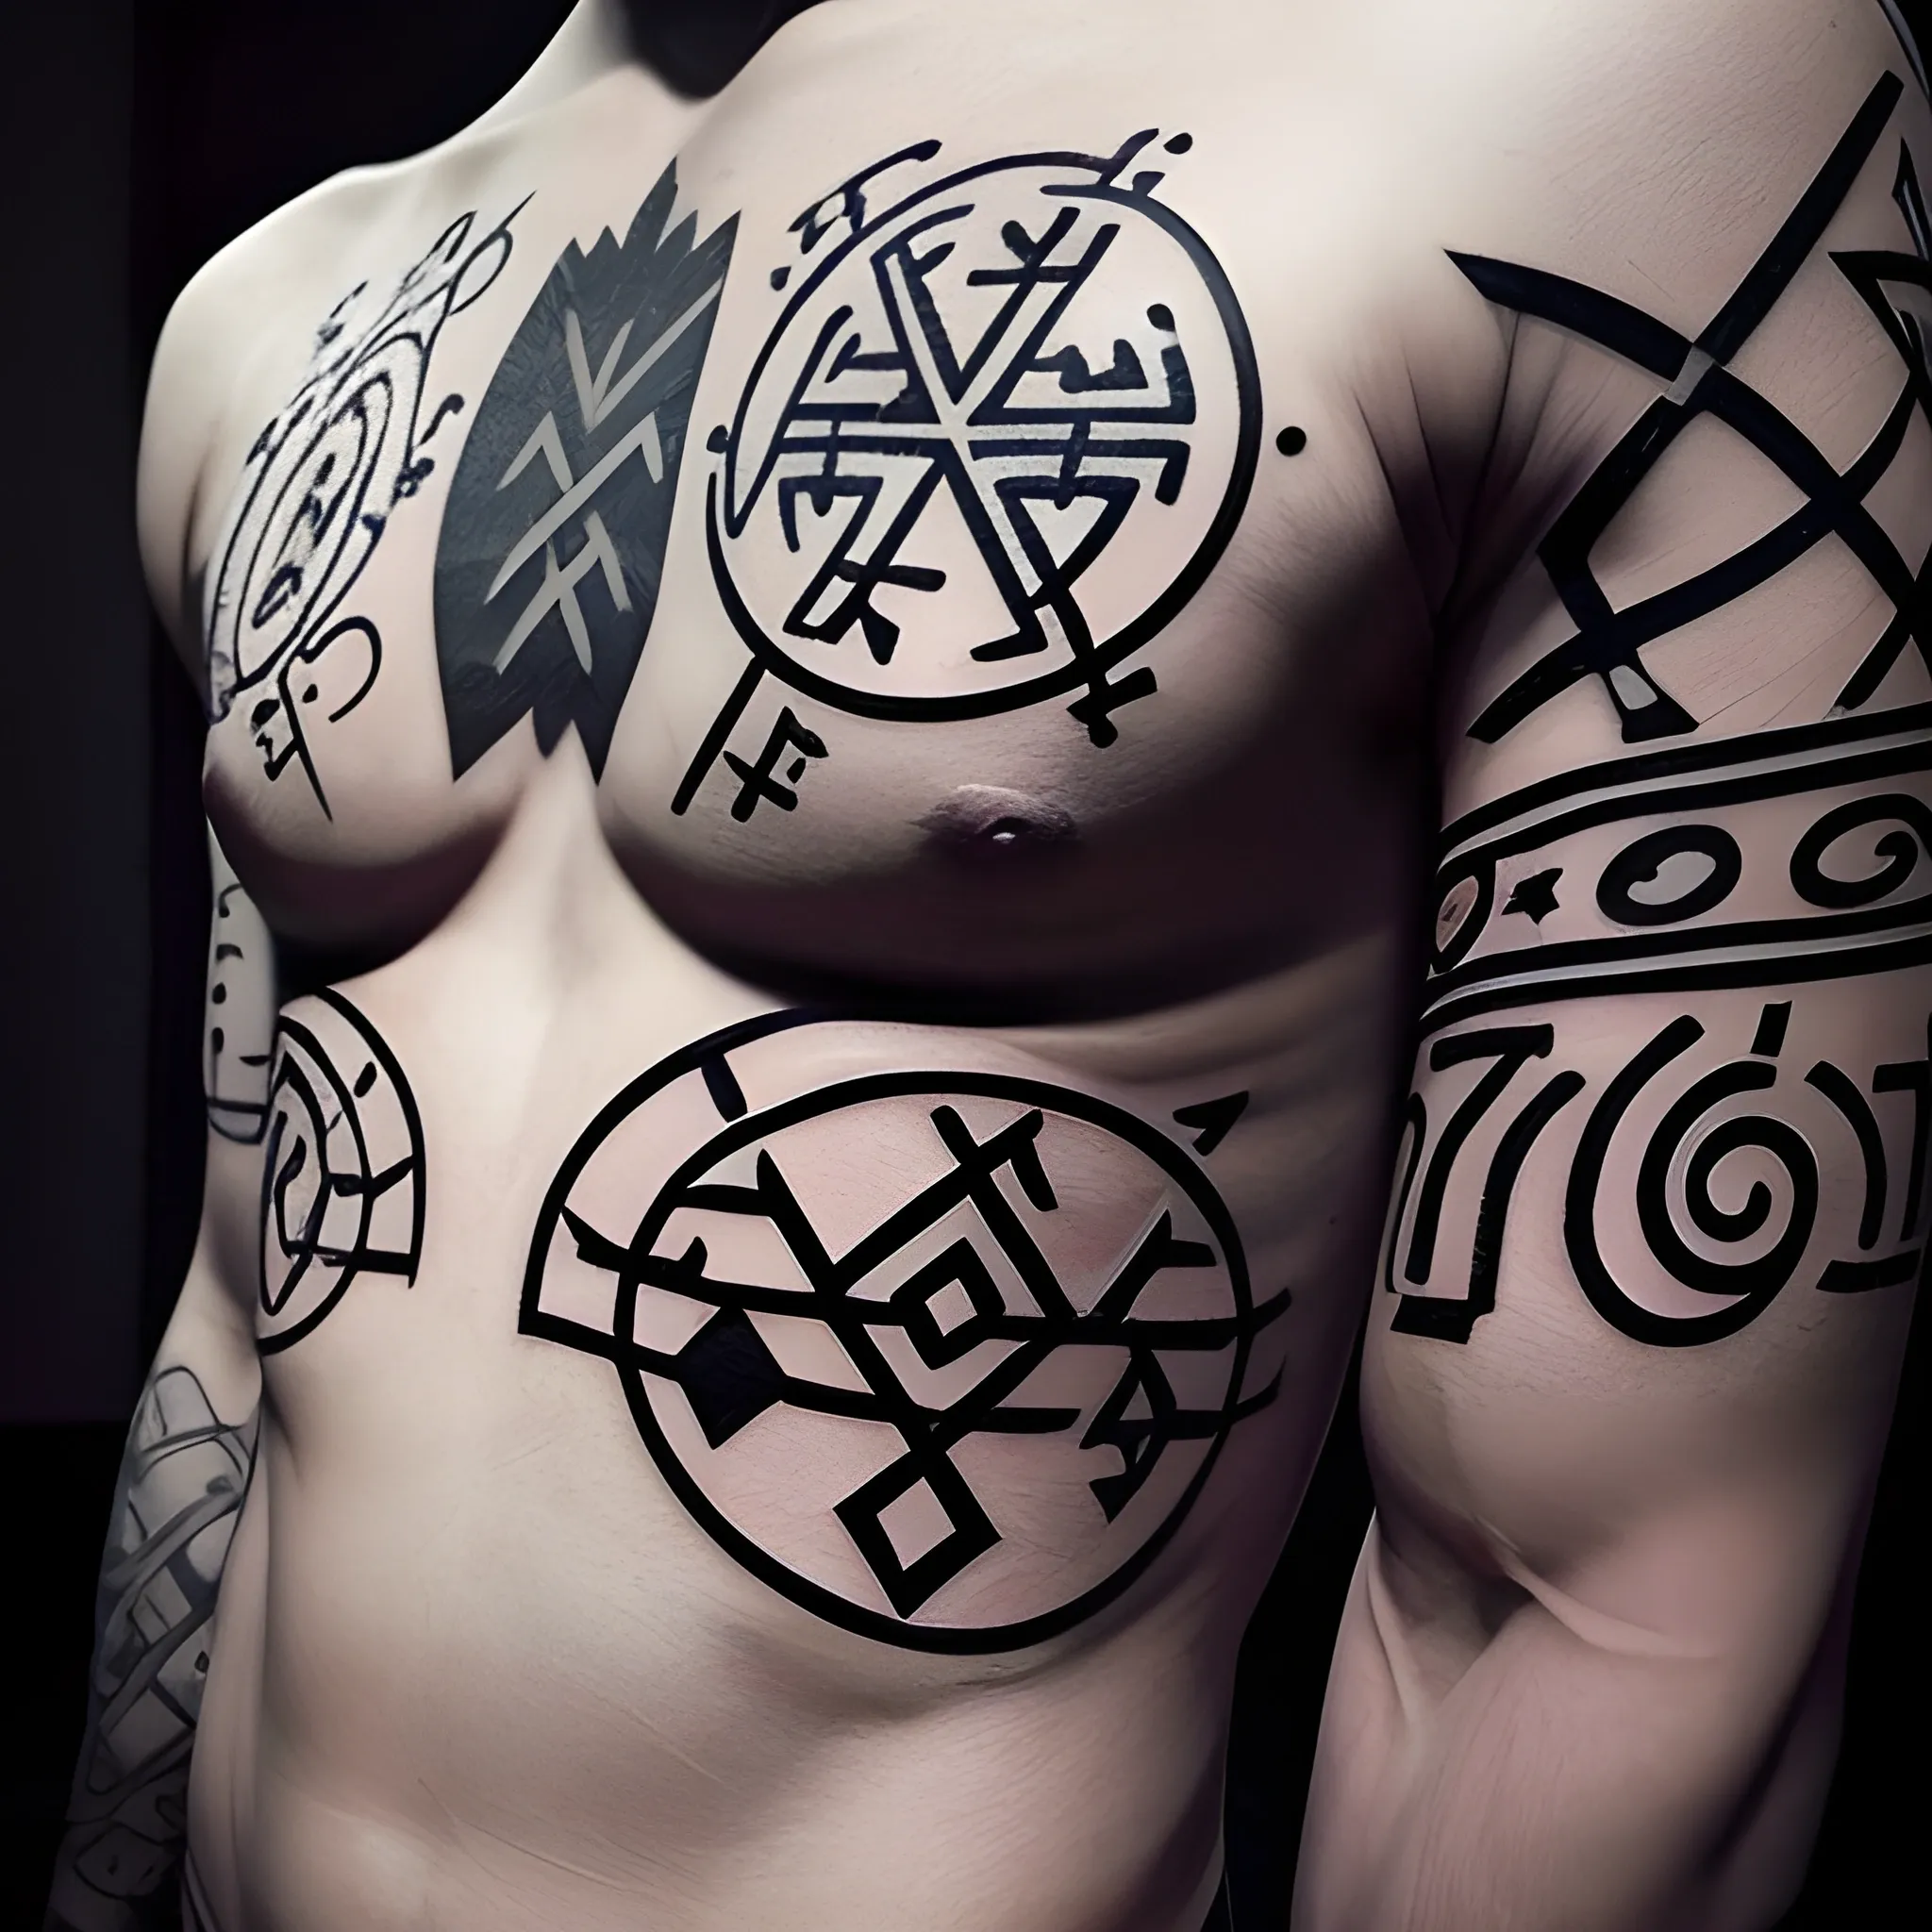 Full of mystery and might from the ancient days, Nordic runes are full of power. As with many of the preceding symbols, this cannot be ever fully explained, for there is too much behind them. Tatto

